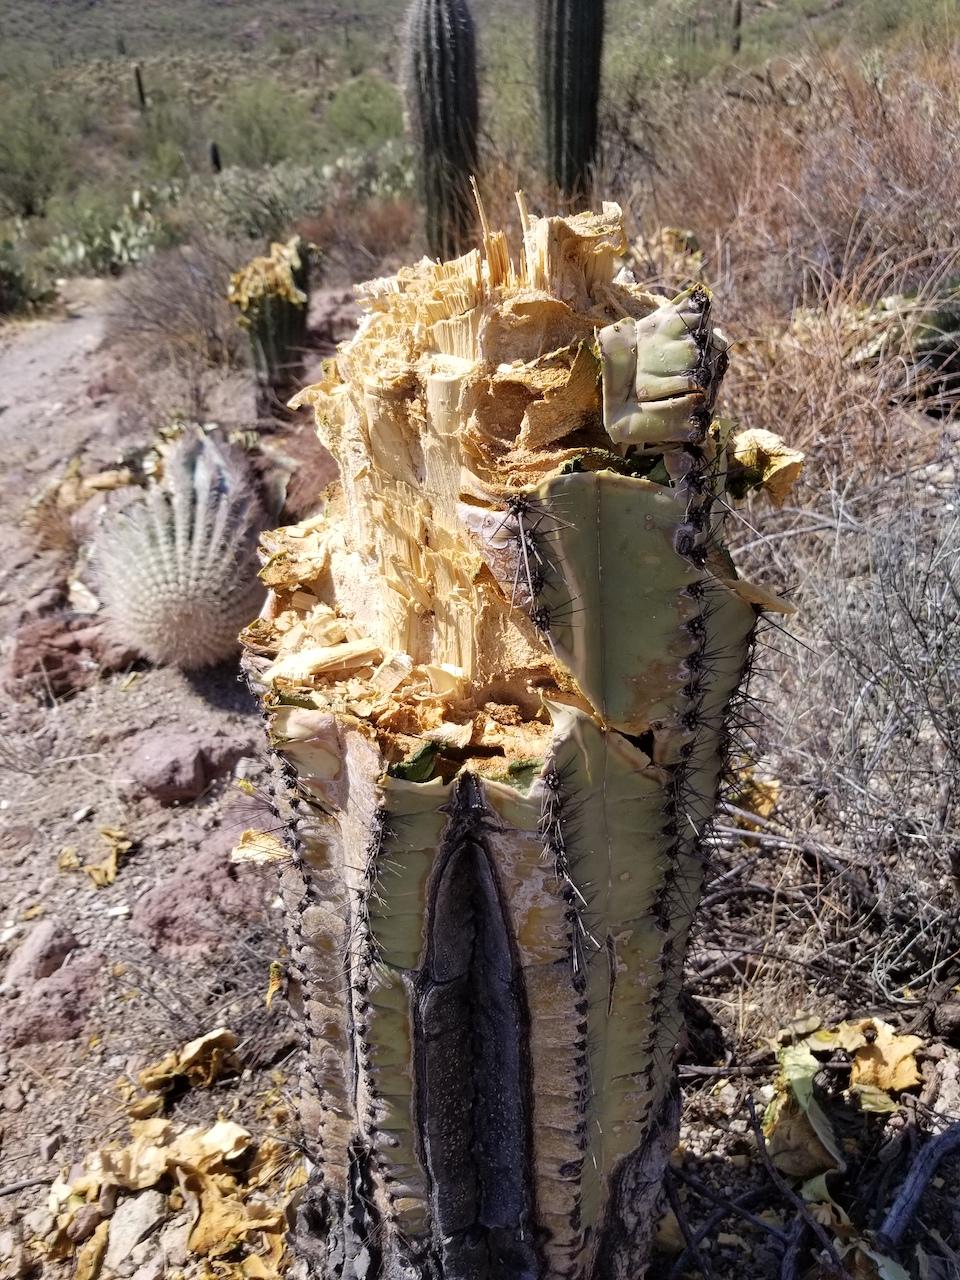 Saguaro National Park rangers are seeking leads into who chopped up saguaros in the park/NPS